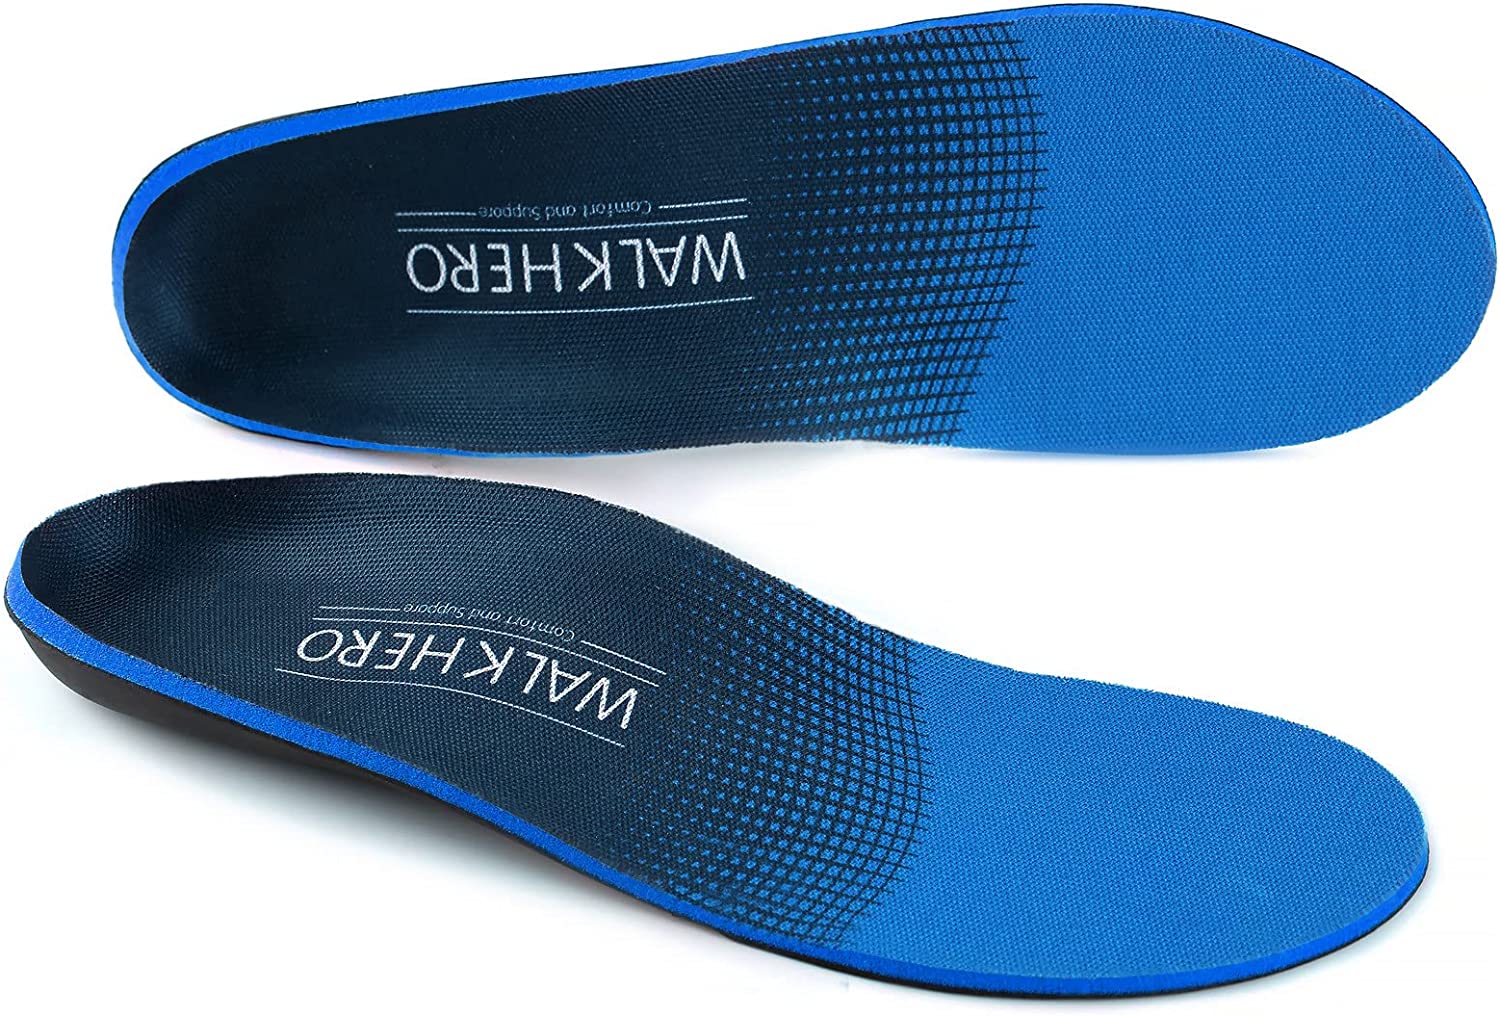 Review of WALKÂ·HERO Plantar Fasciitis Feet Insoles Arch Supports Orthotics Inserts